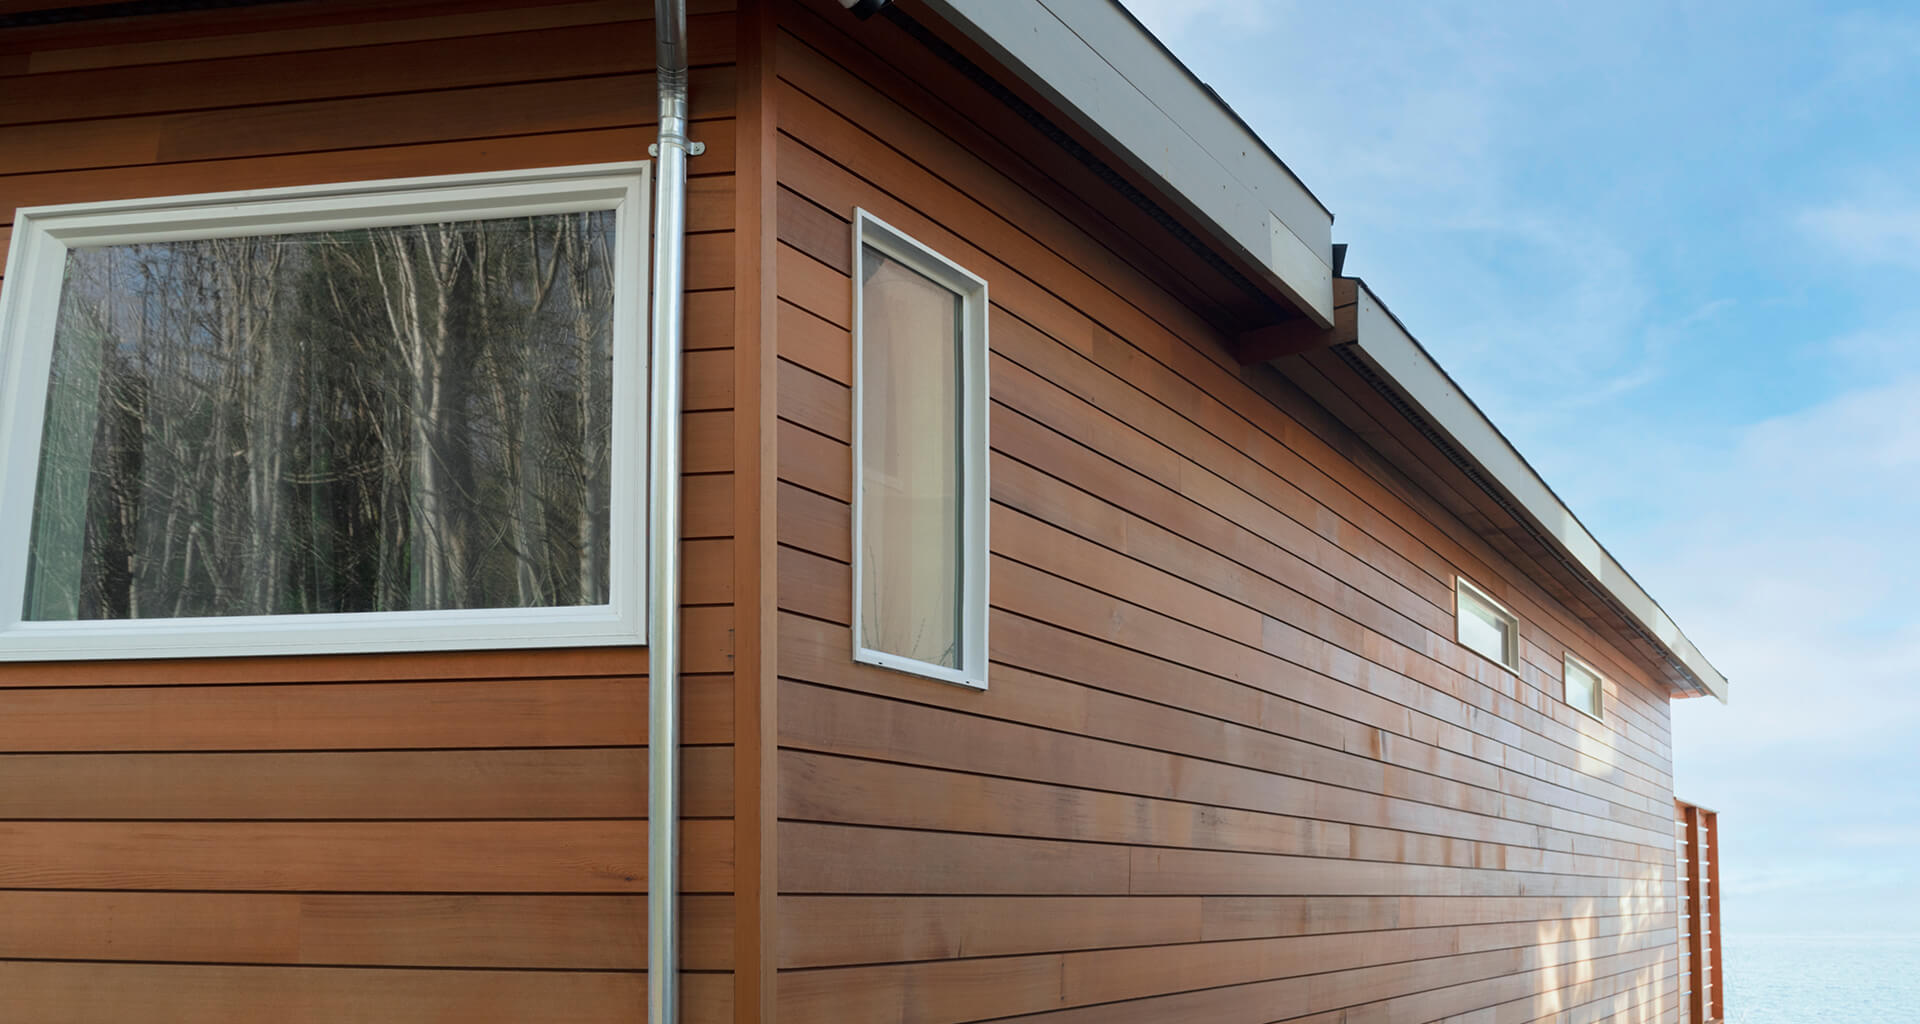 8 Common Siding Problems and How to Fix Them